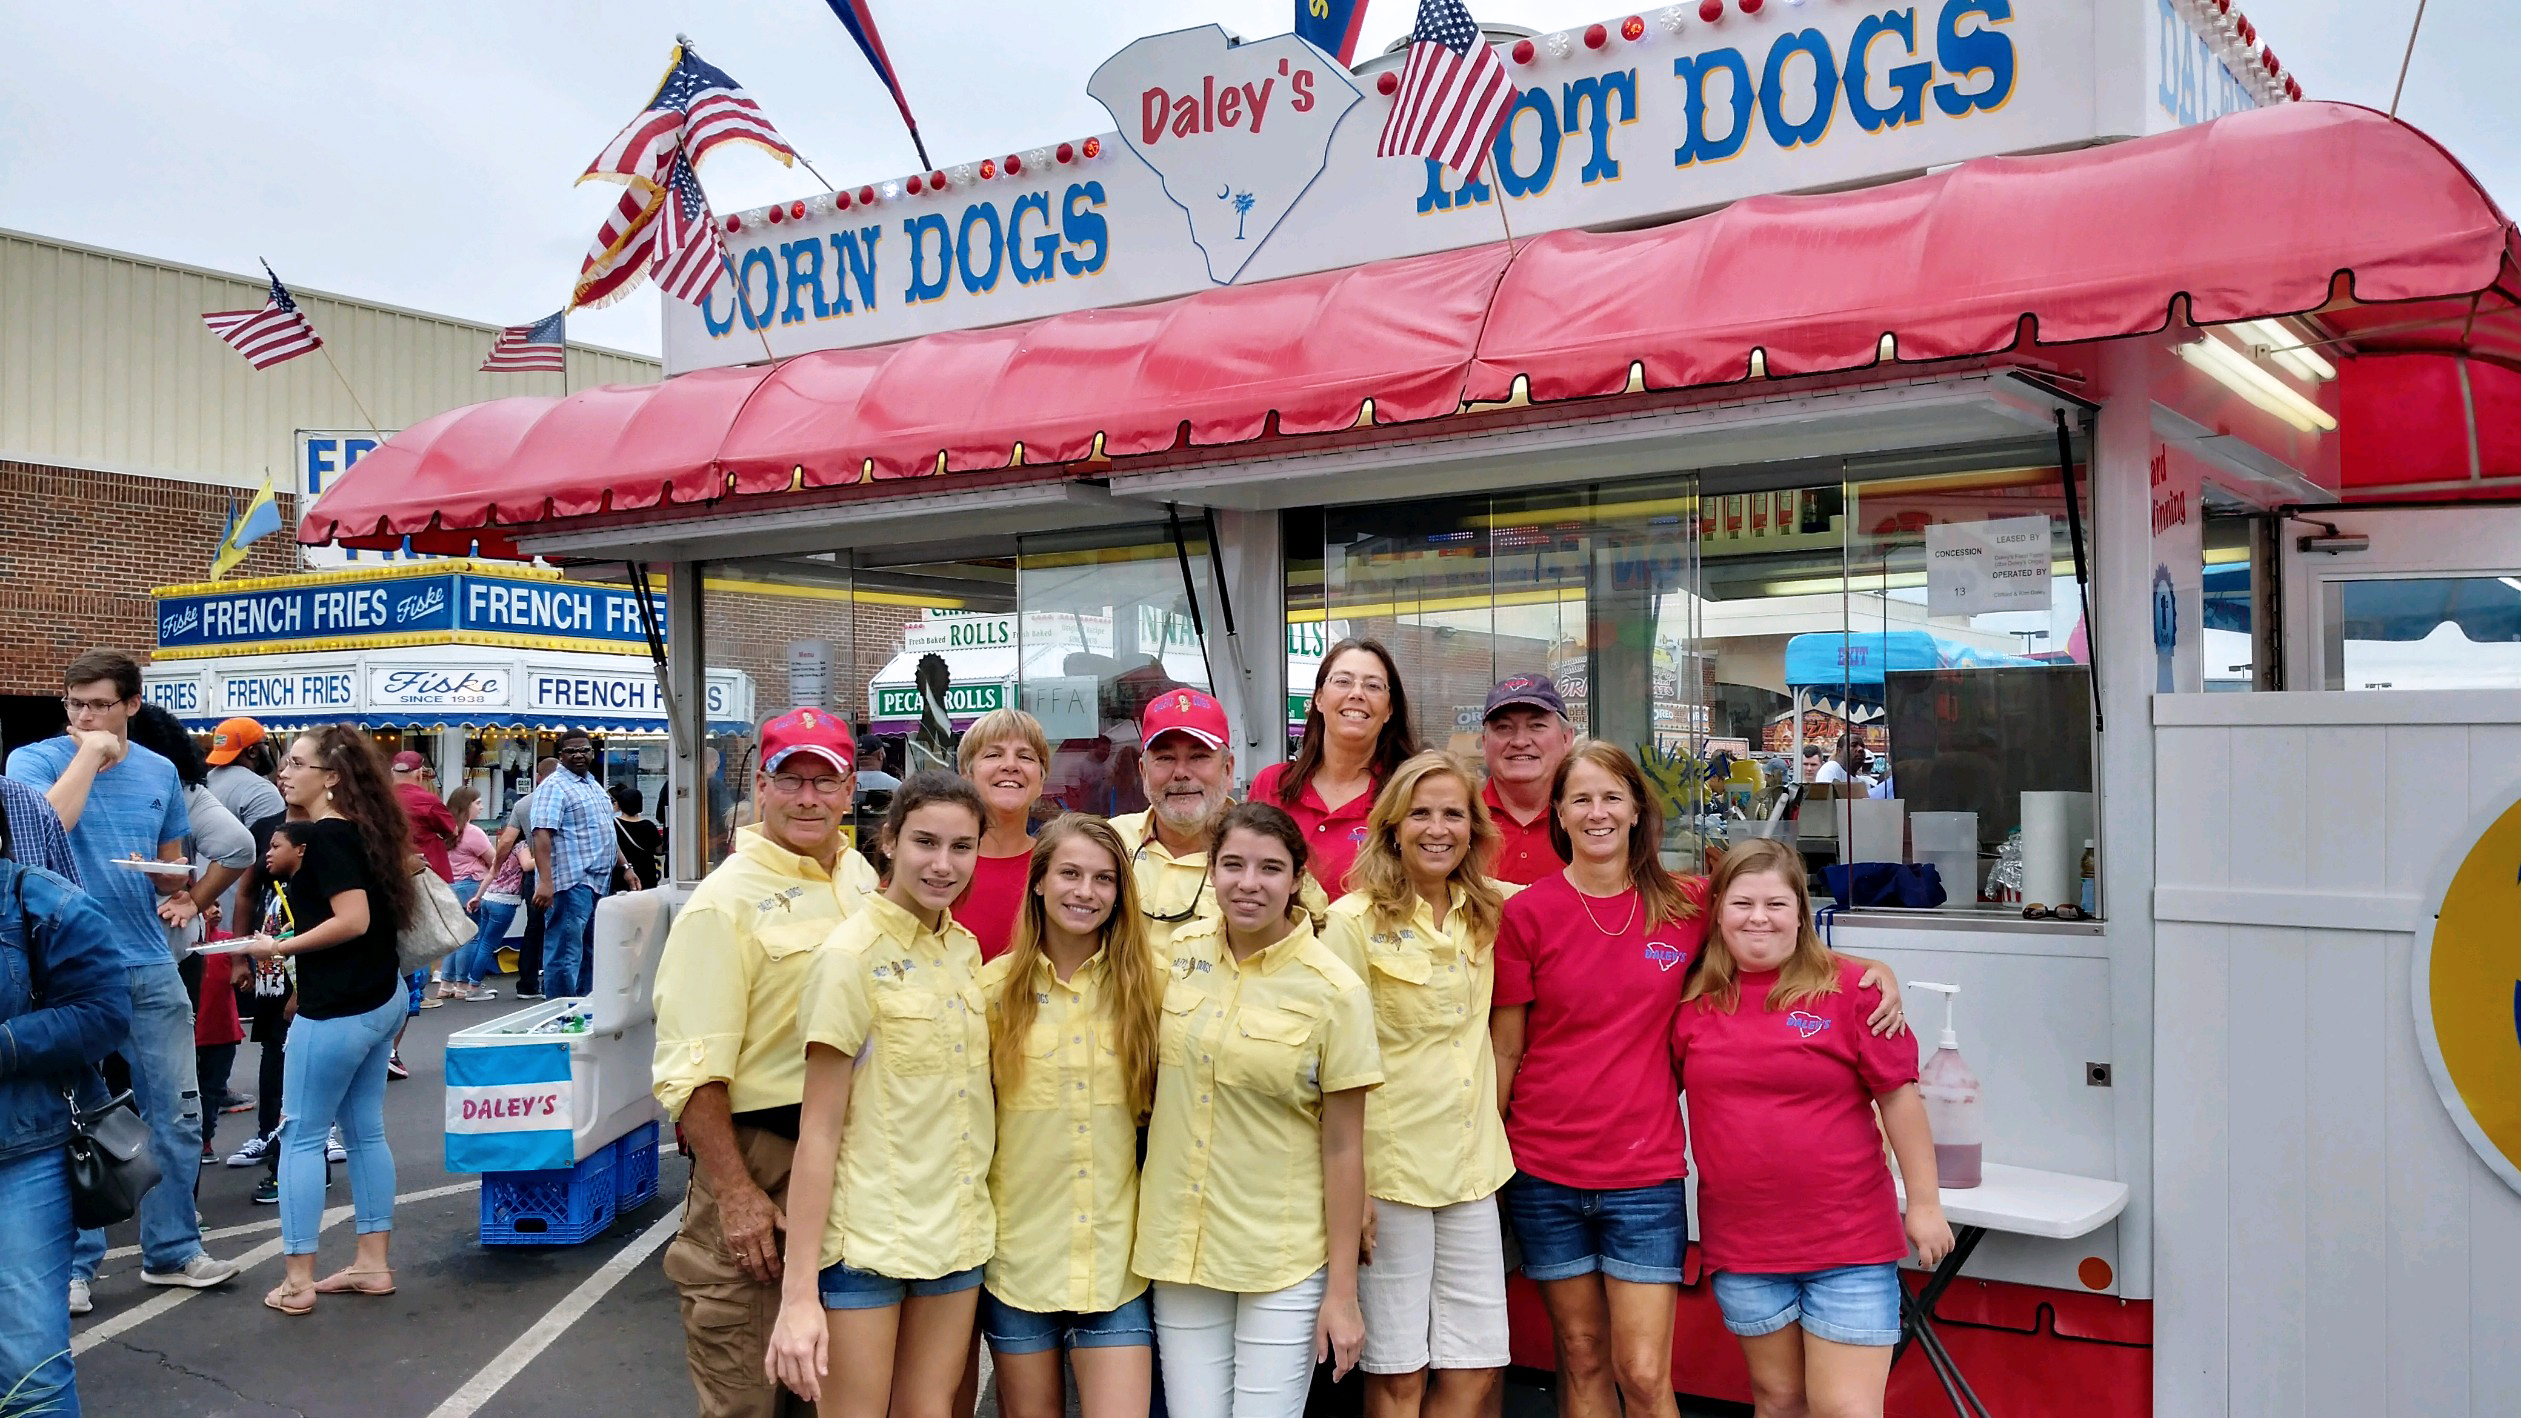 One of the top revenue producers at the State Fair, Daley’s Concessions is a third generation family business that has served the fair since 1962. The Daley family has offered, in addition to award-winning homemade hand dipped corn dogs, a Daley Double corn dog and a pickled corn dog.